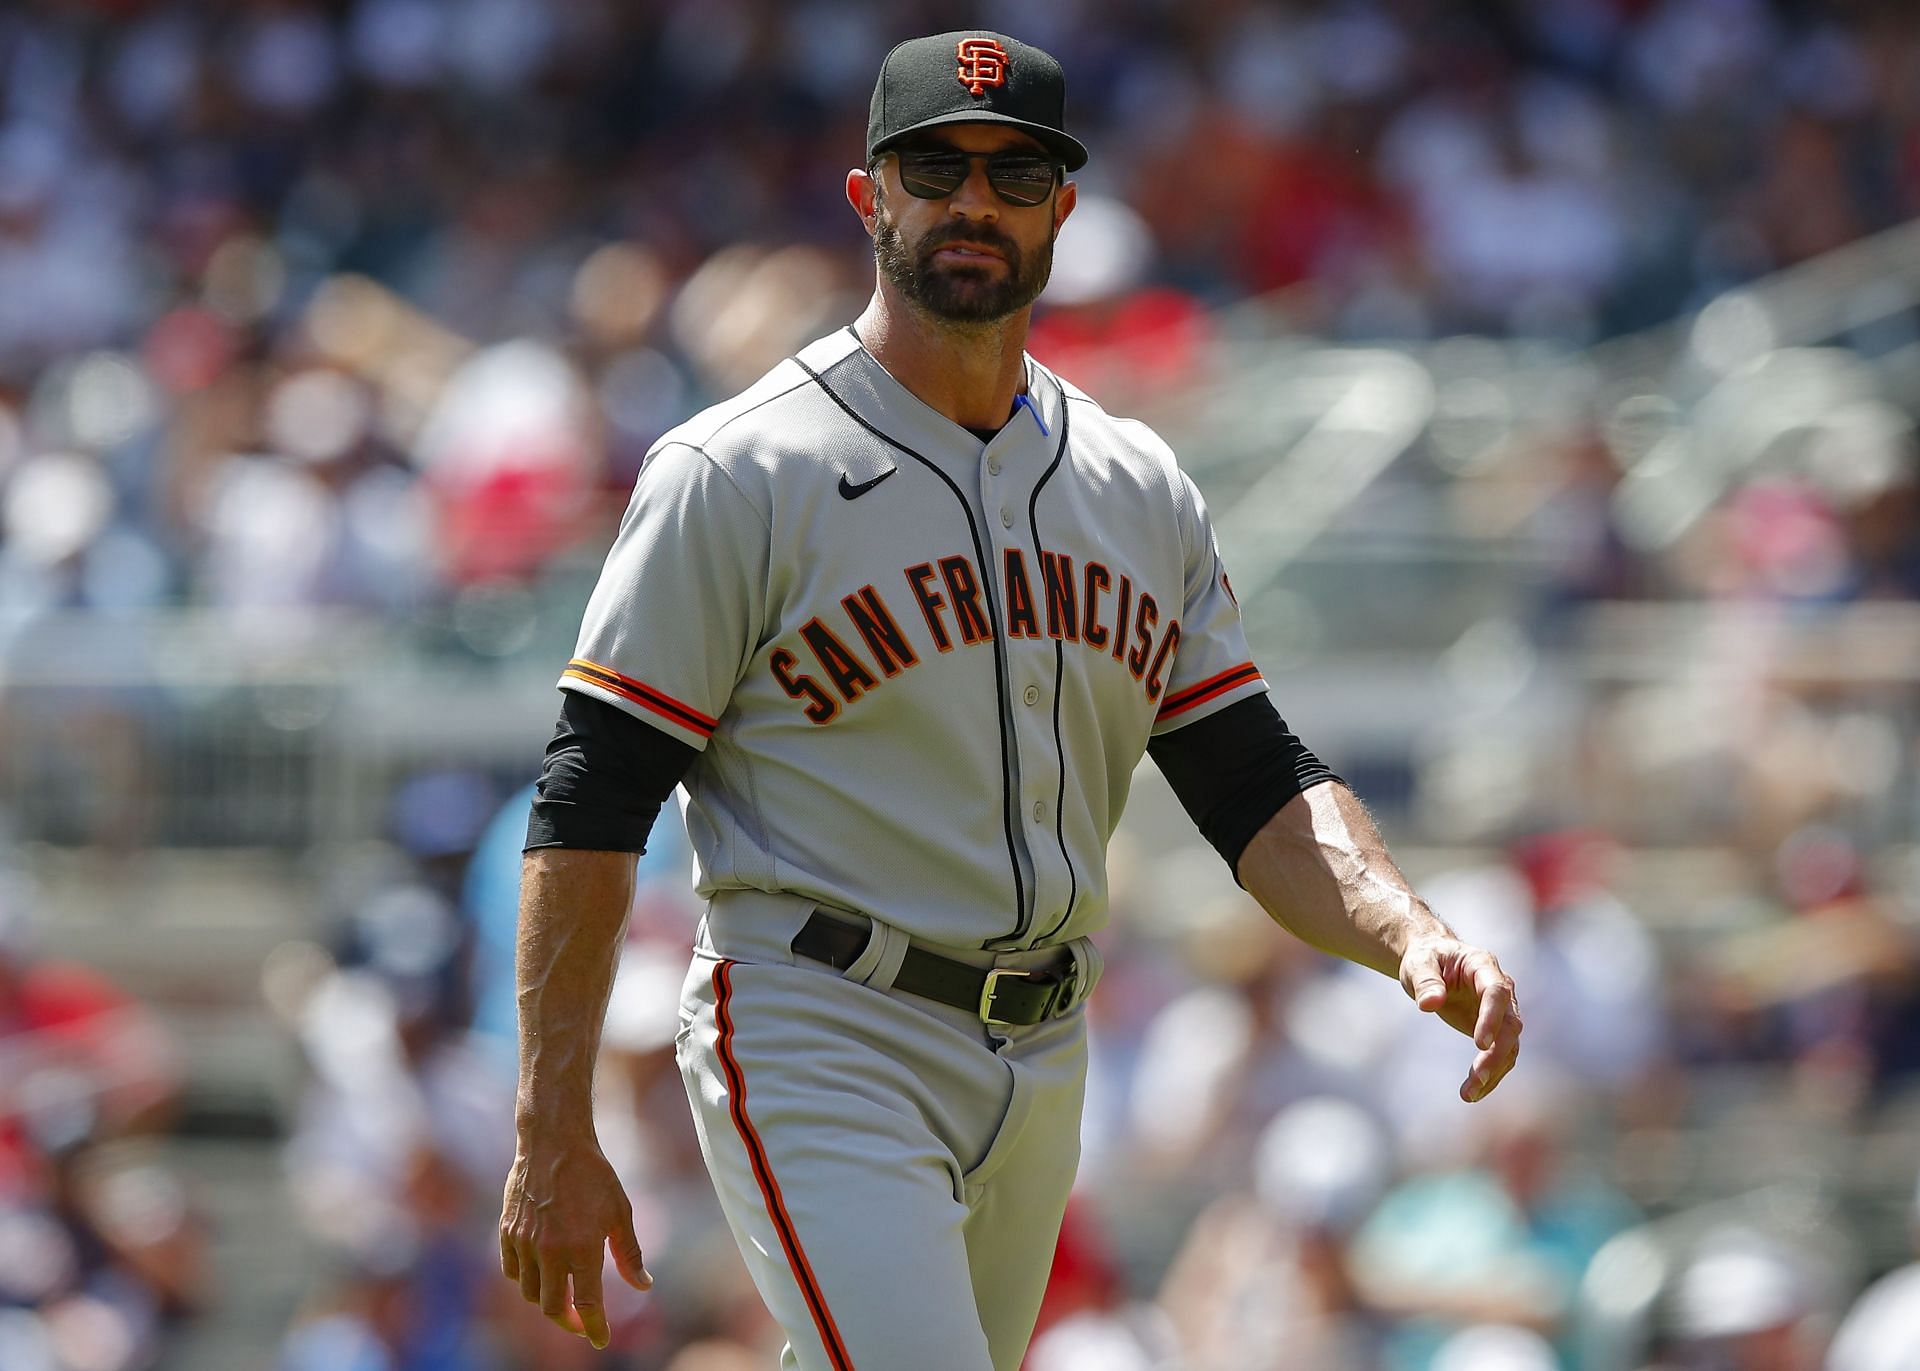 San Francisco Giants manager Gabe Kapler will not take the field for the American national anthem